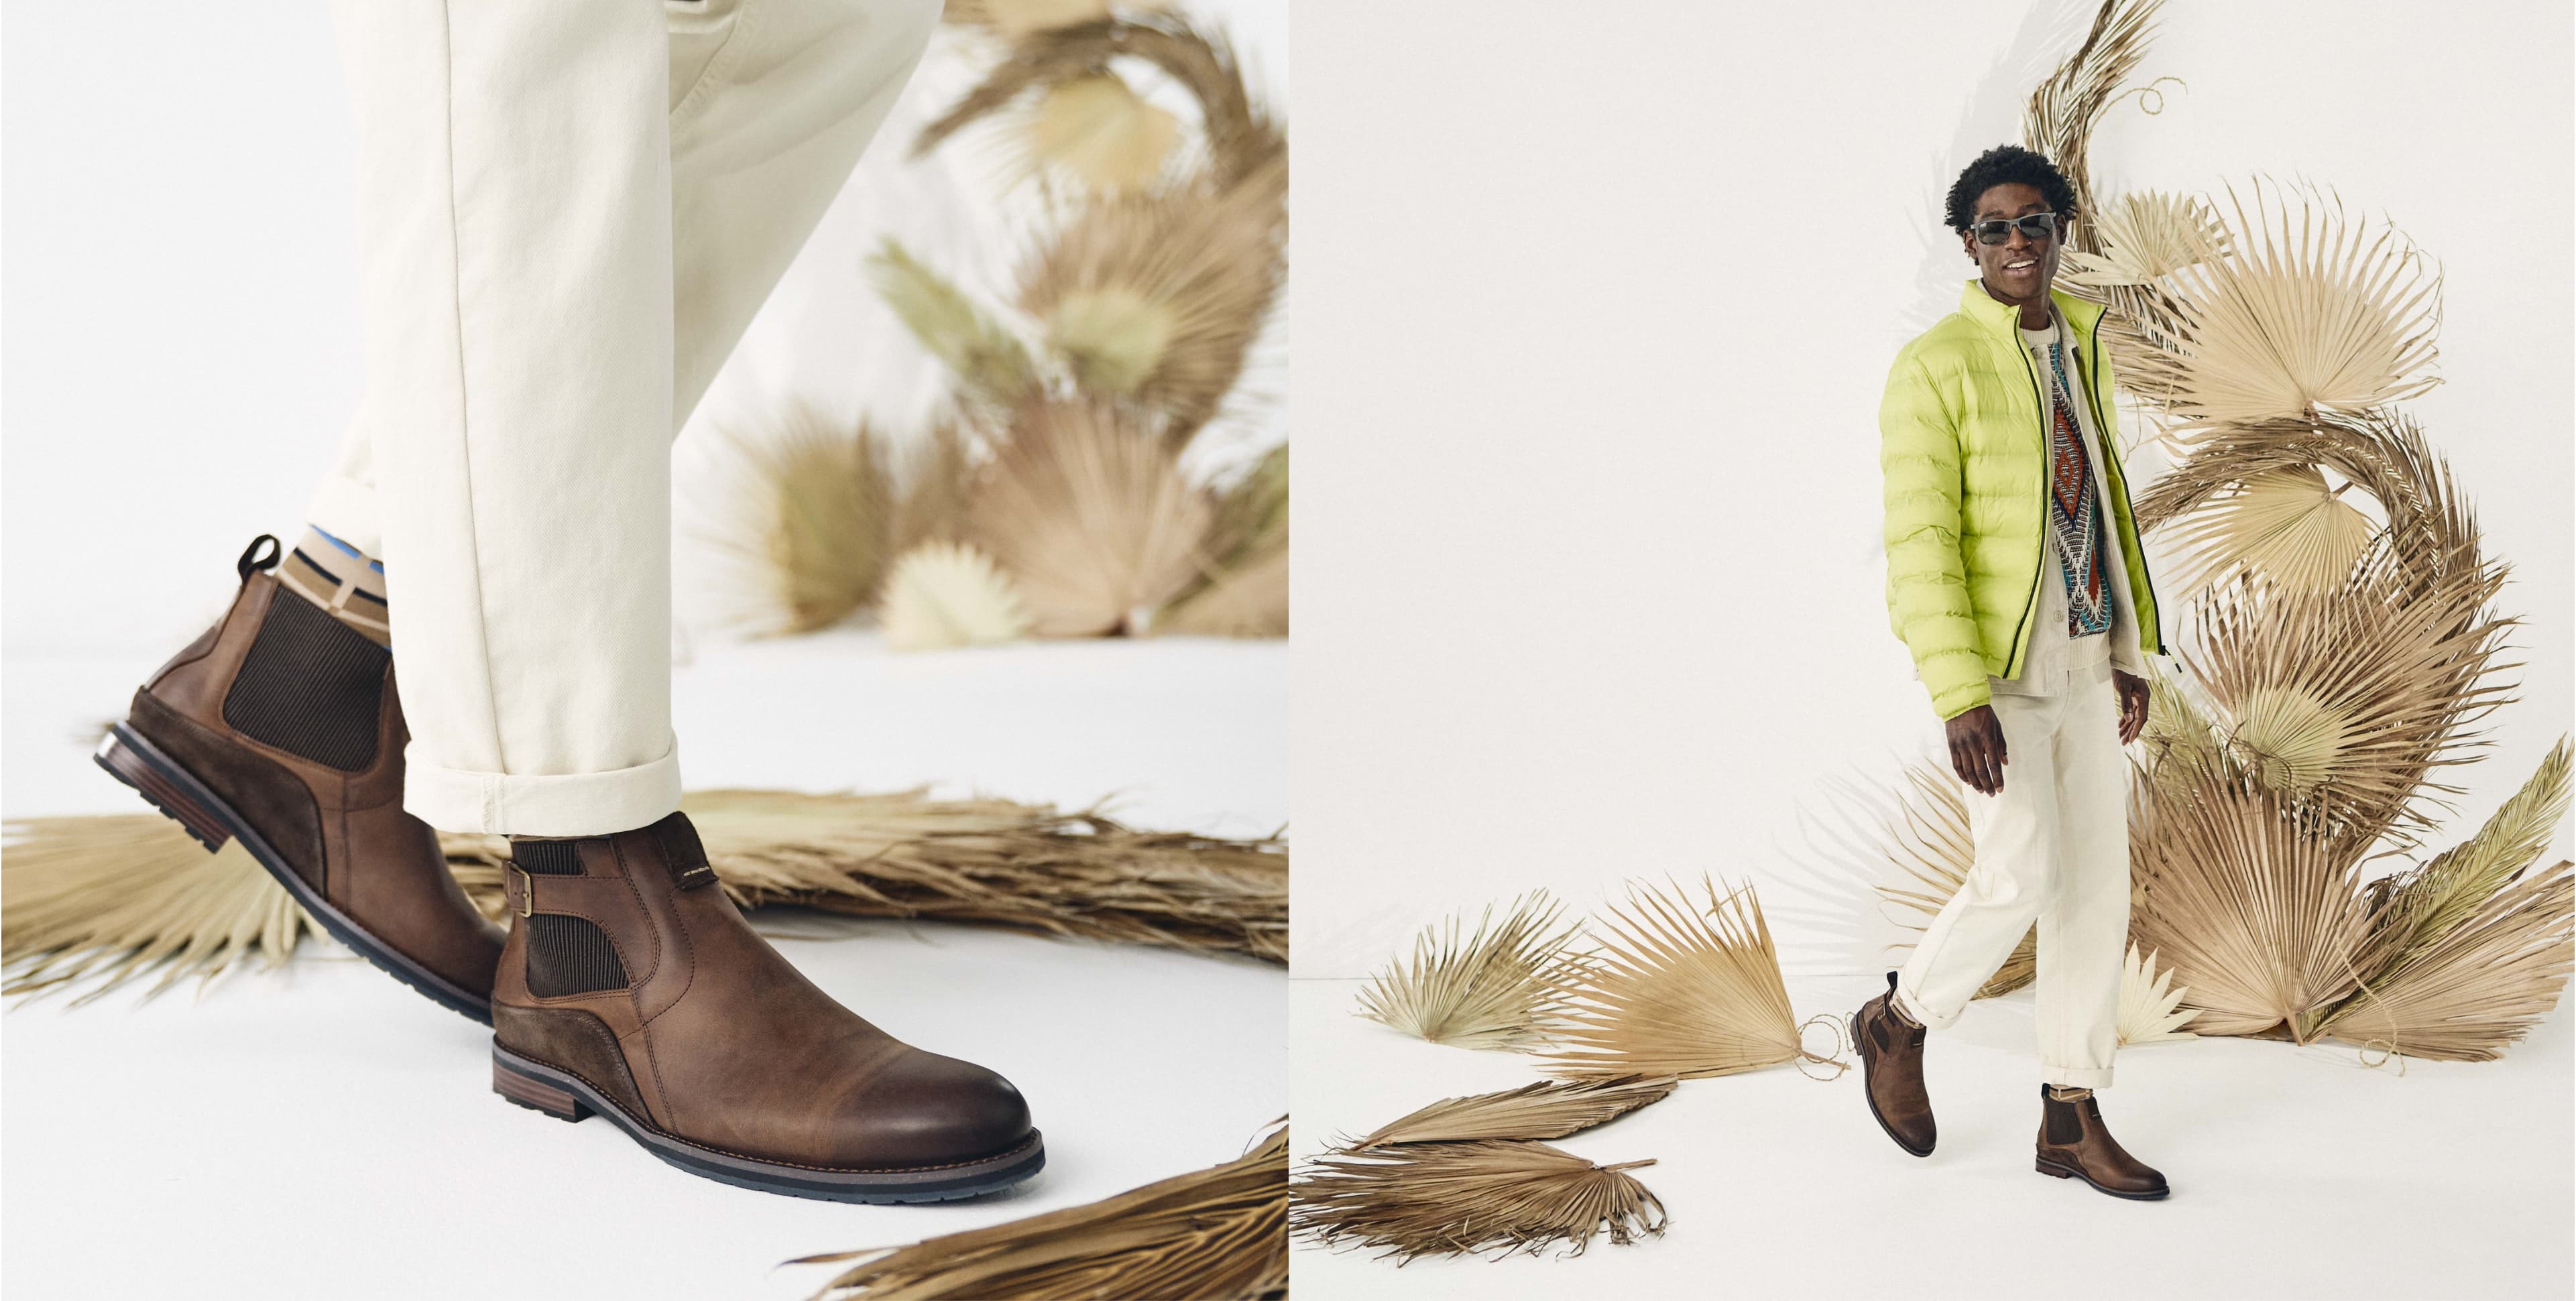 Click to shop Stacy Adams new arrivals. Image features the Oskar boot in brown.